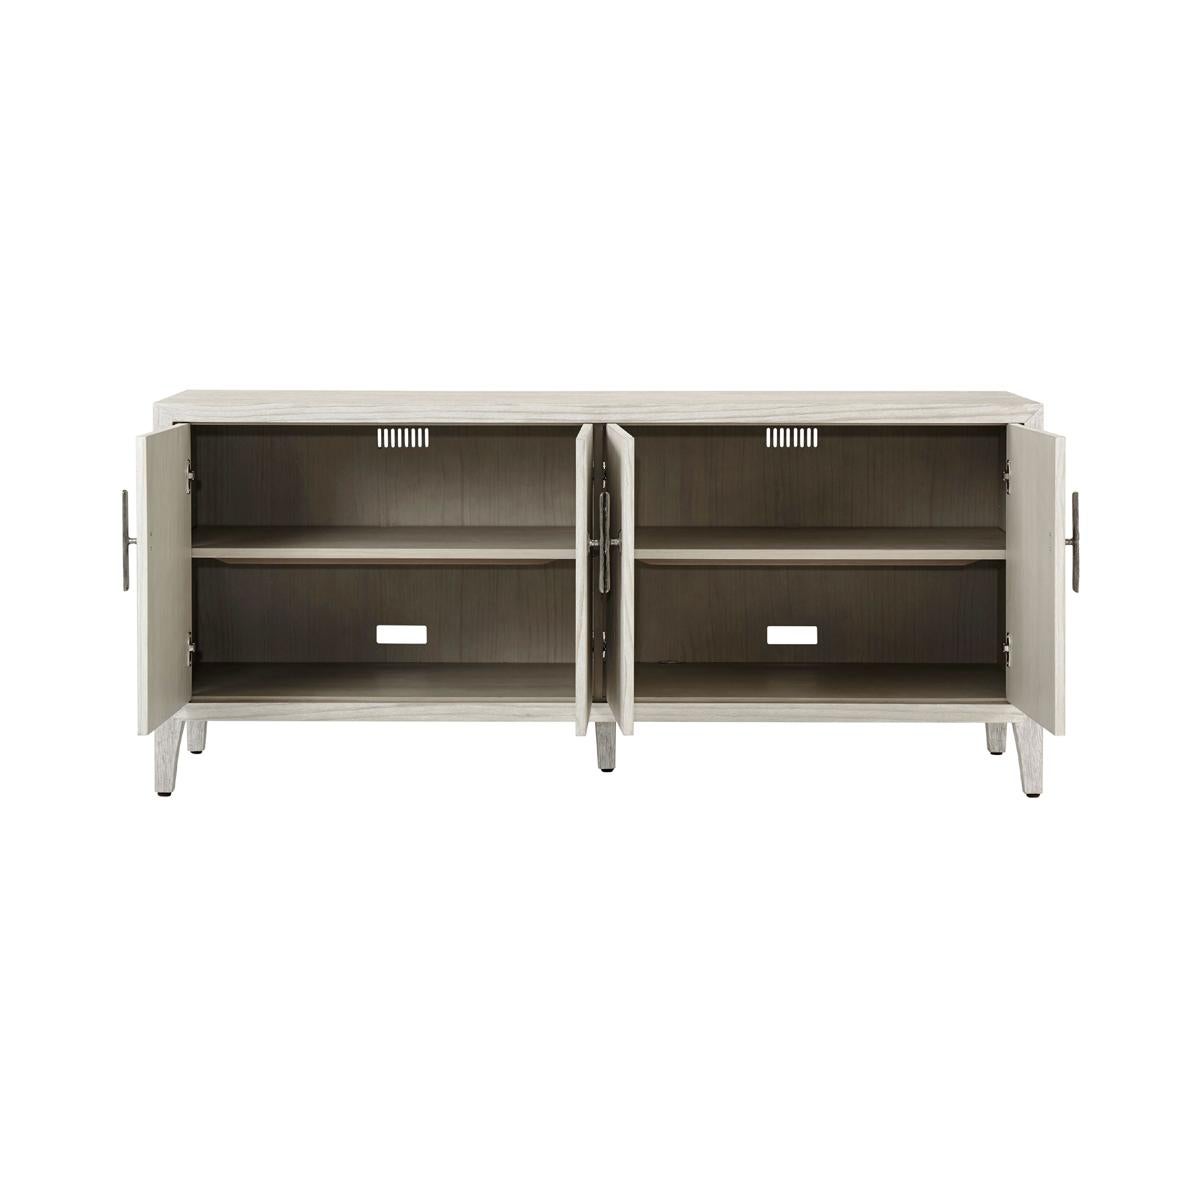 Introducing the Modern Coastal Entertainment cabinet, a stunning addition to any entertainment space. This elegant four-door console is crafted from wire-brushed cerused pine in a beautiful Sea Salt finish, creating a warm and inviting atmosphere in